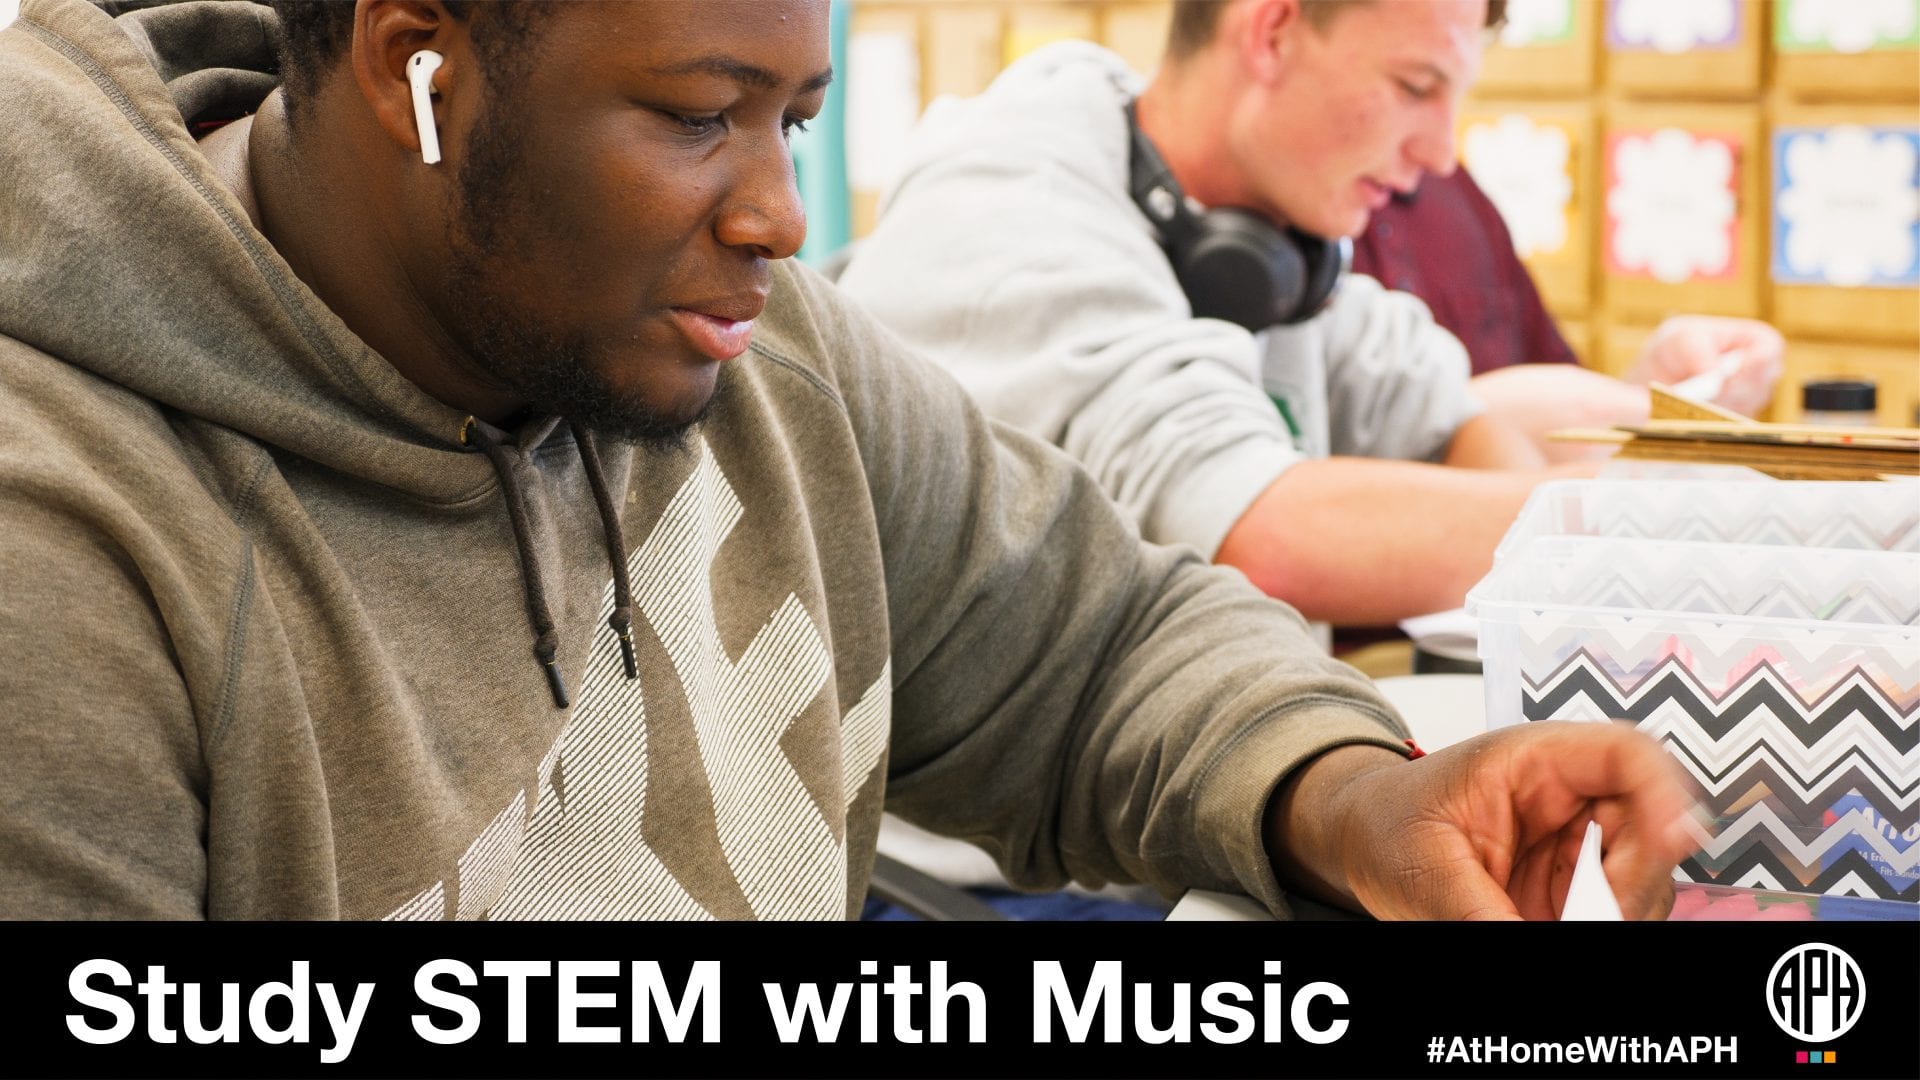 two teenage students in the classroom doing work with headphones. text reads "Studying STEM with Music #AtHomeWithAPH"